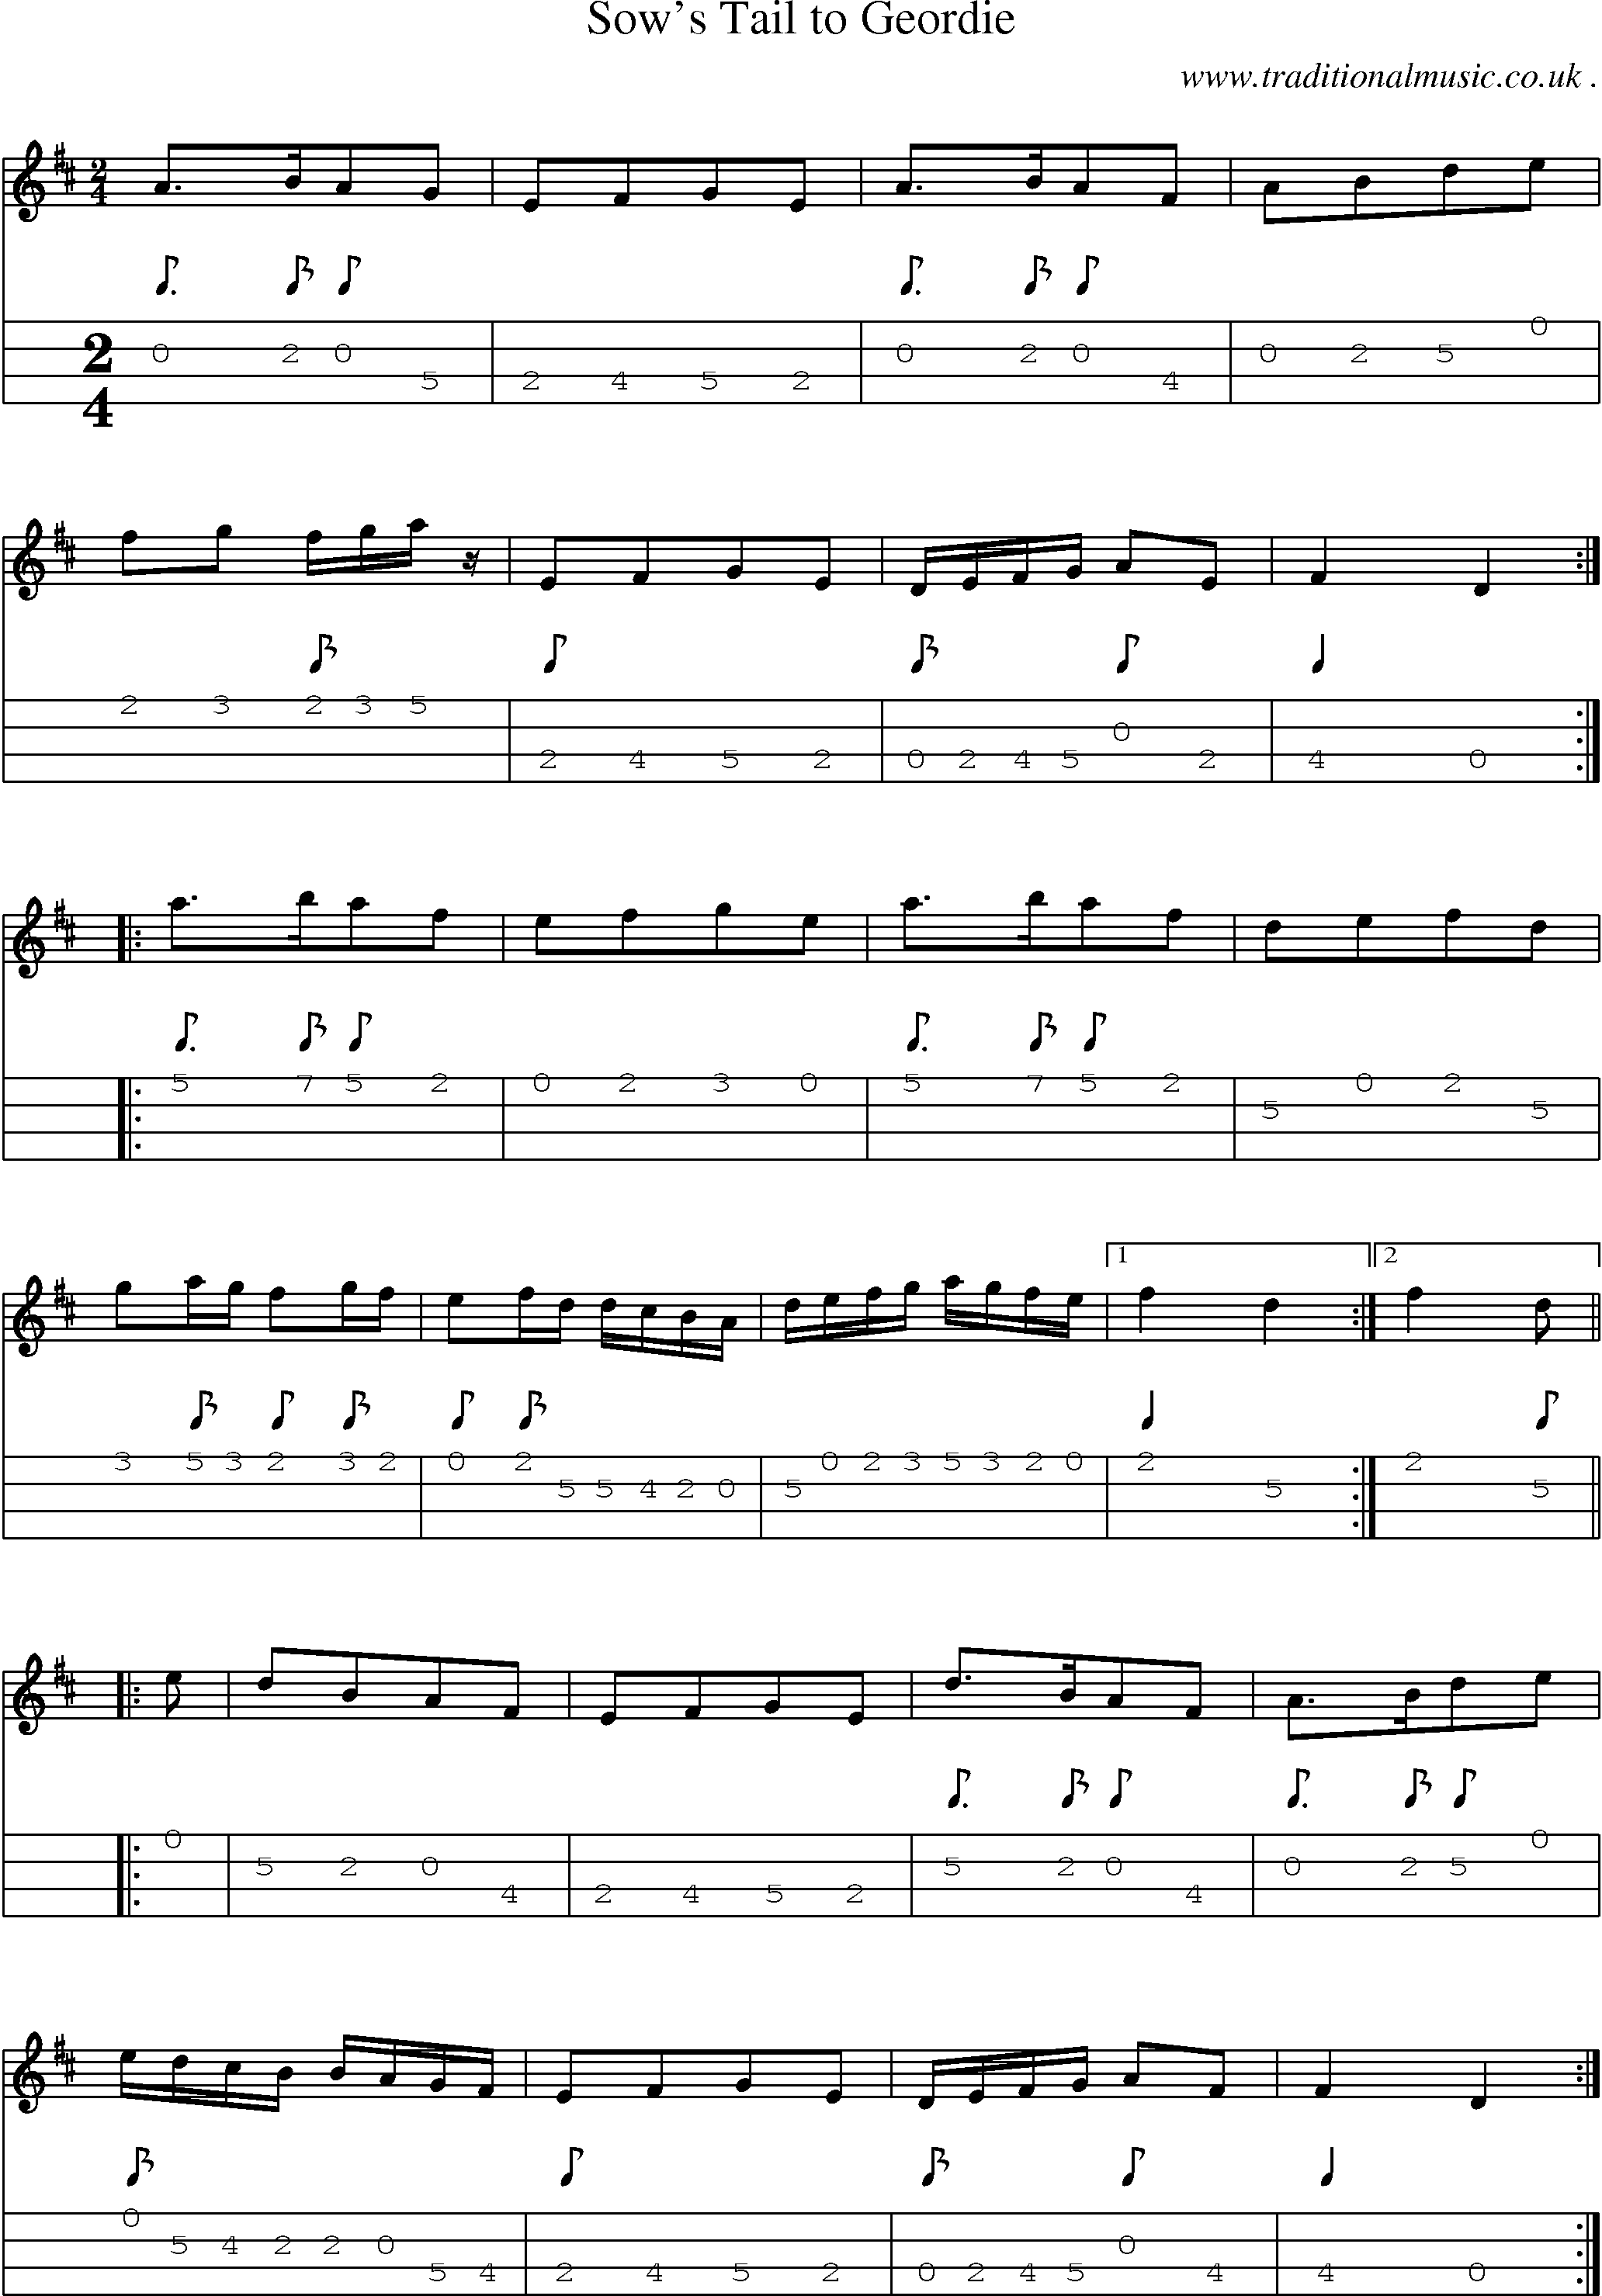 Sheet-Music and Mandolin Tabs for Sows Tail To Geordie